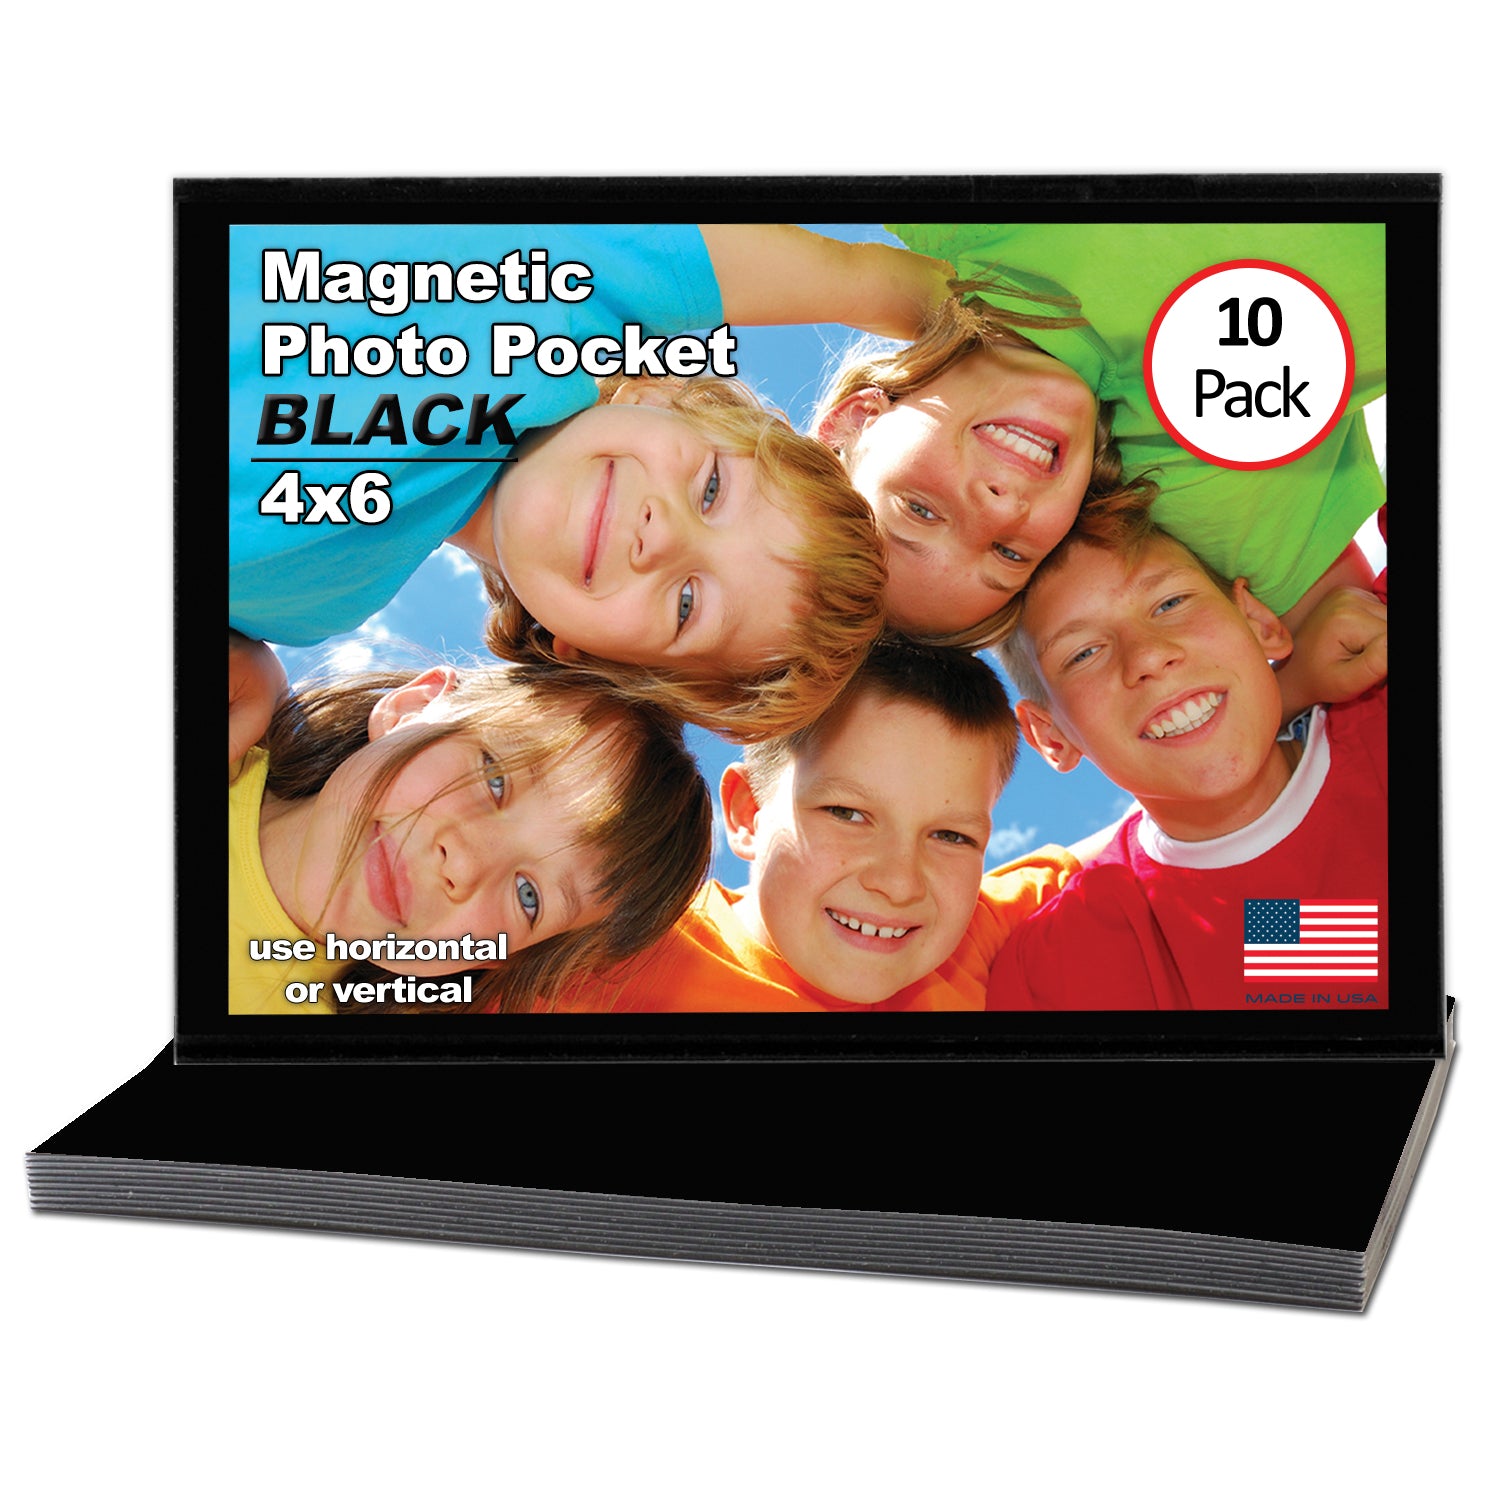 11 Pack Magnetic Photo Sleeves 4x6 Picture Holder Wall Decoration Fridge  Magnet